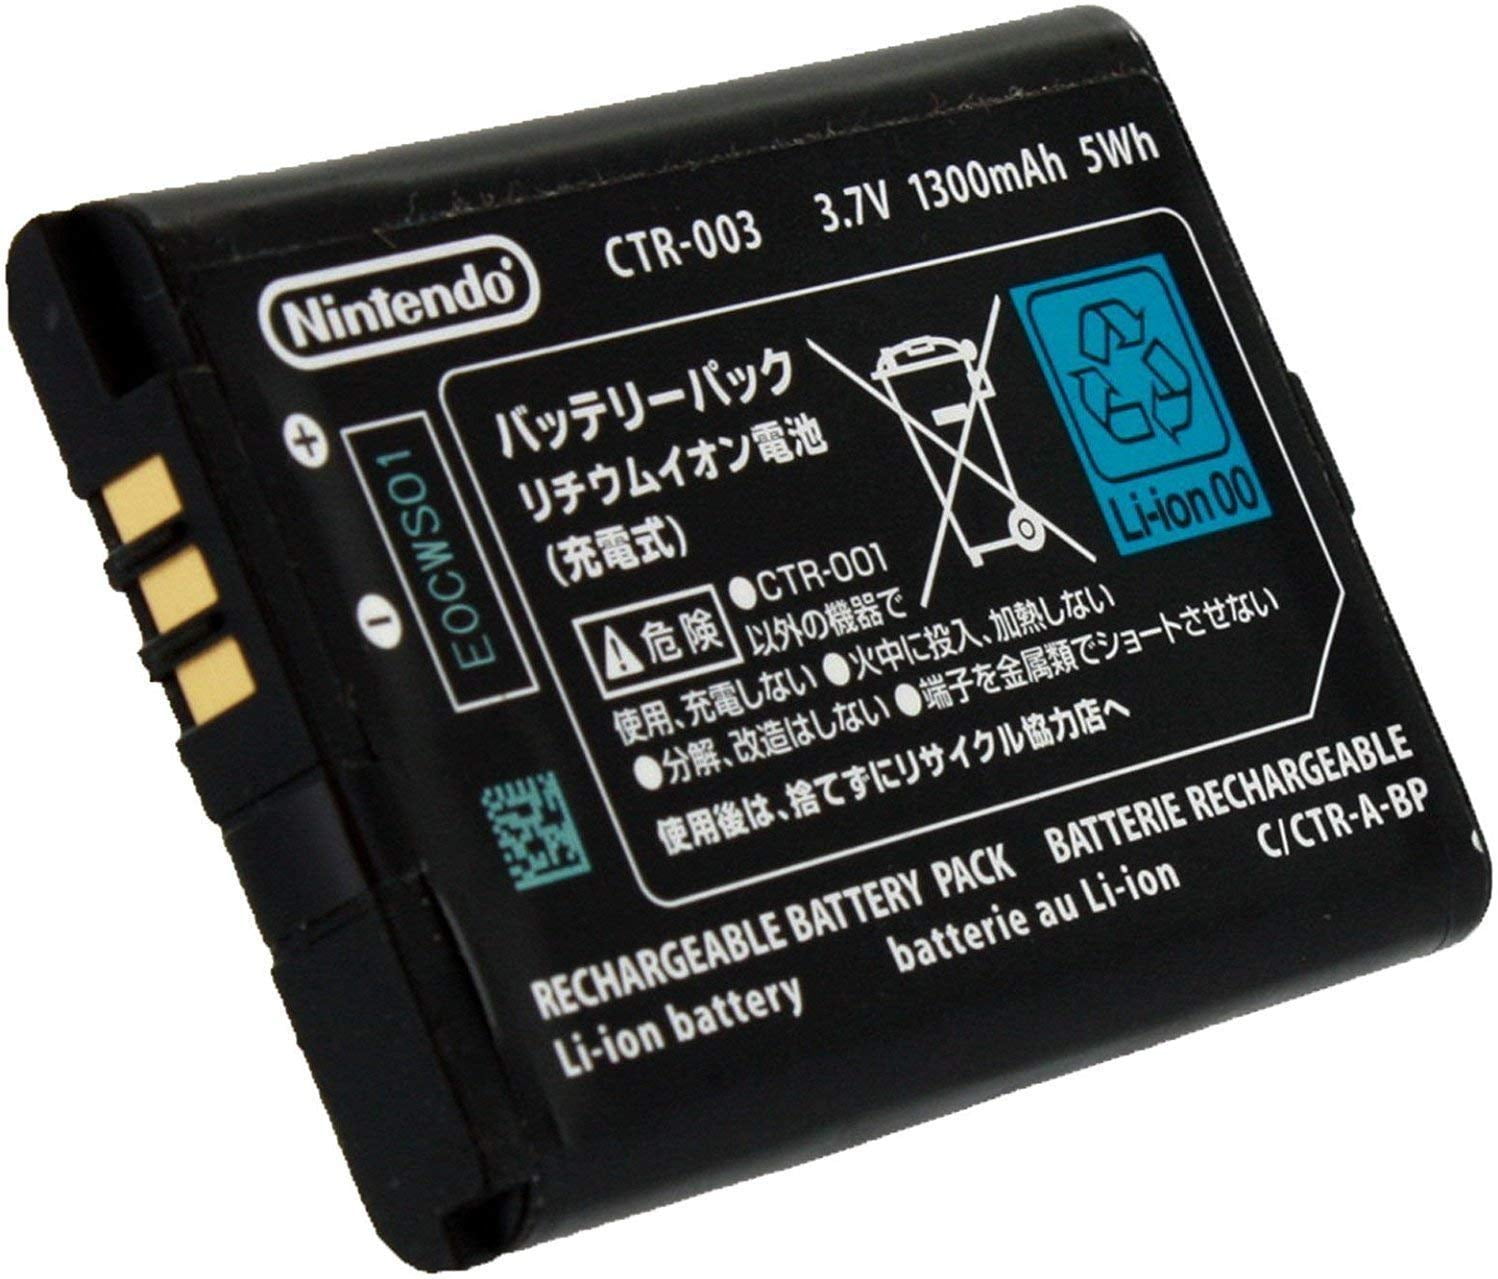 Official Original Nintendo 3DS CTR-003 Rechargeable Battery (Not compatiable with 3DS XL) (Used) Walmart.com